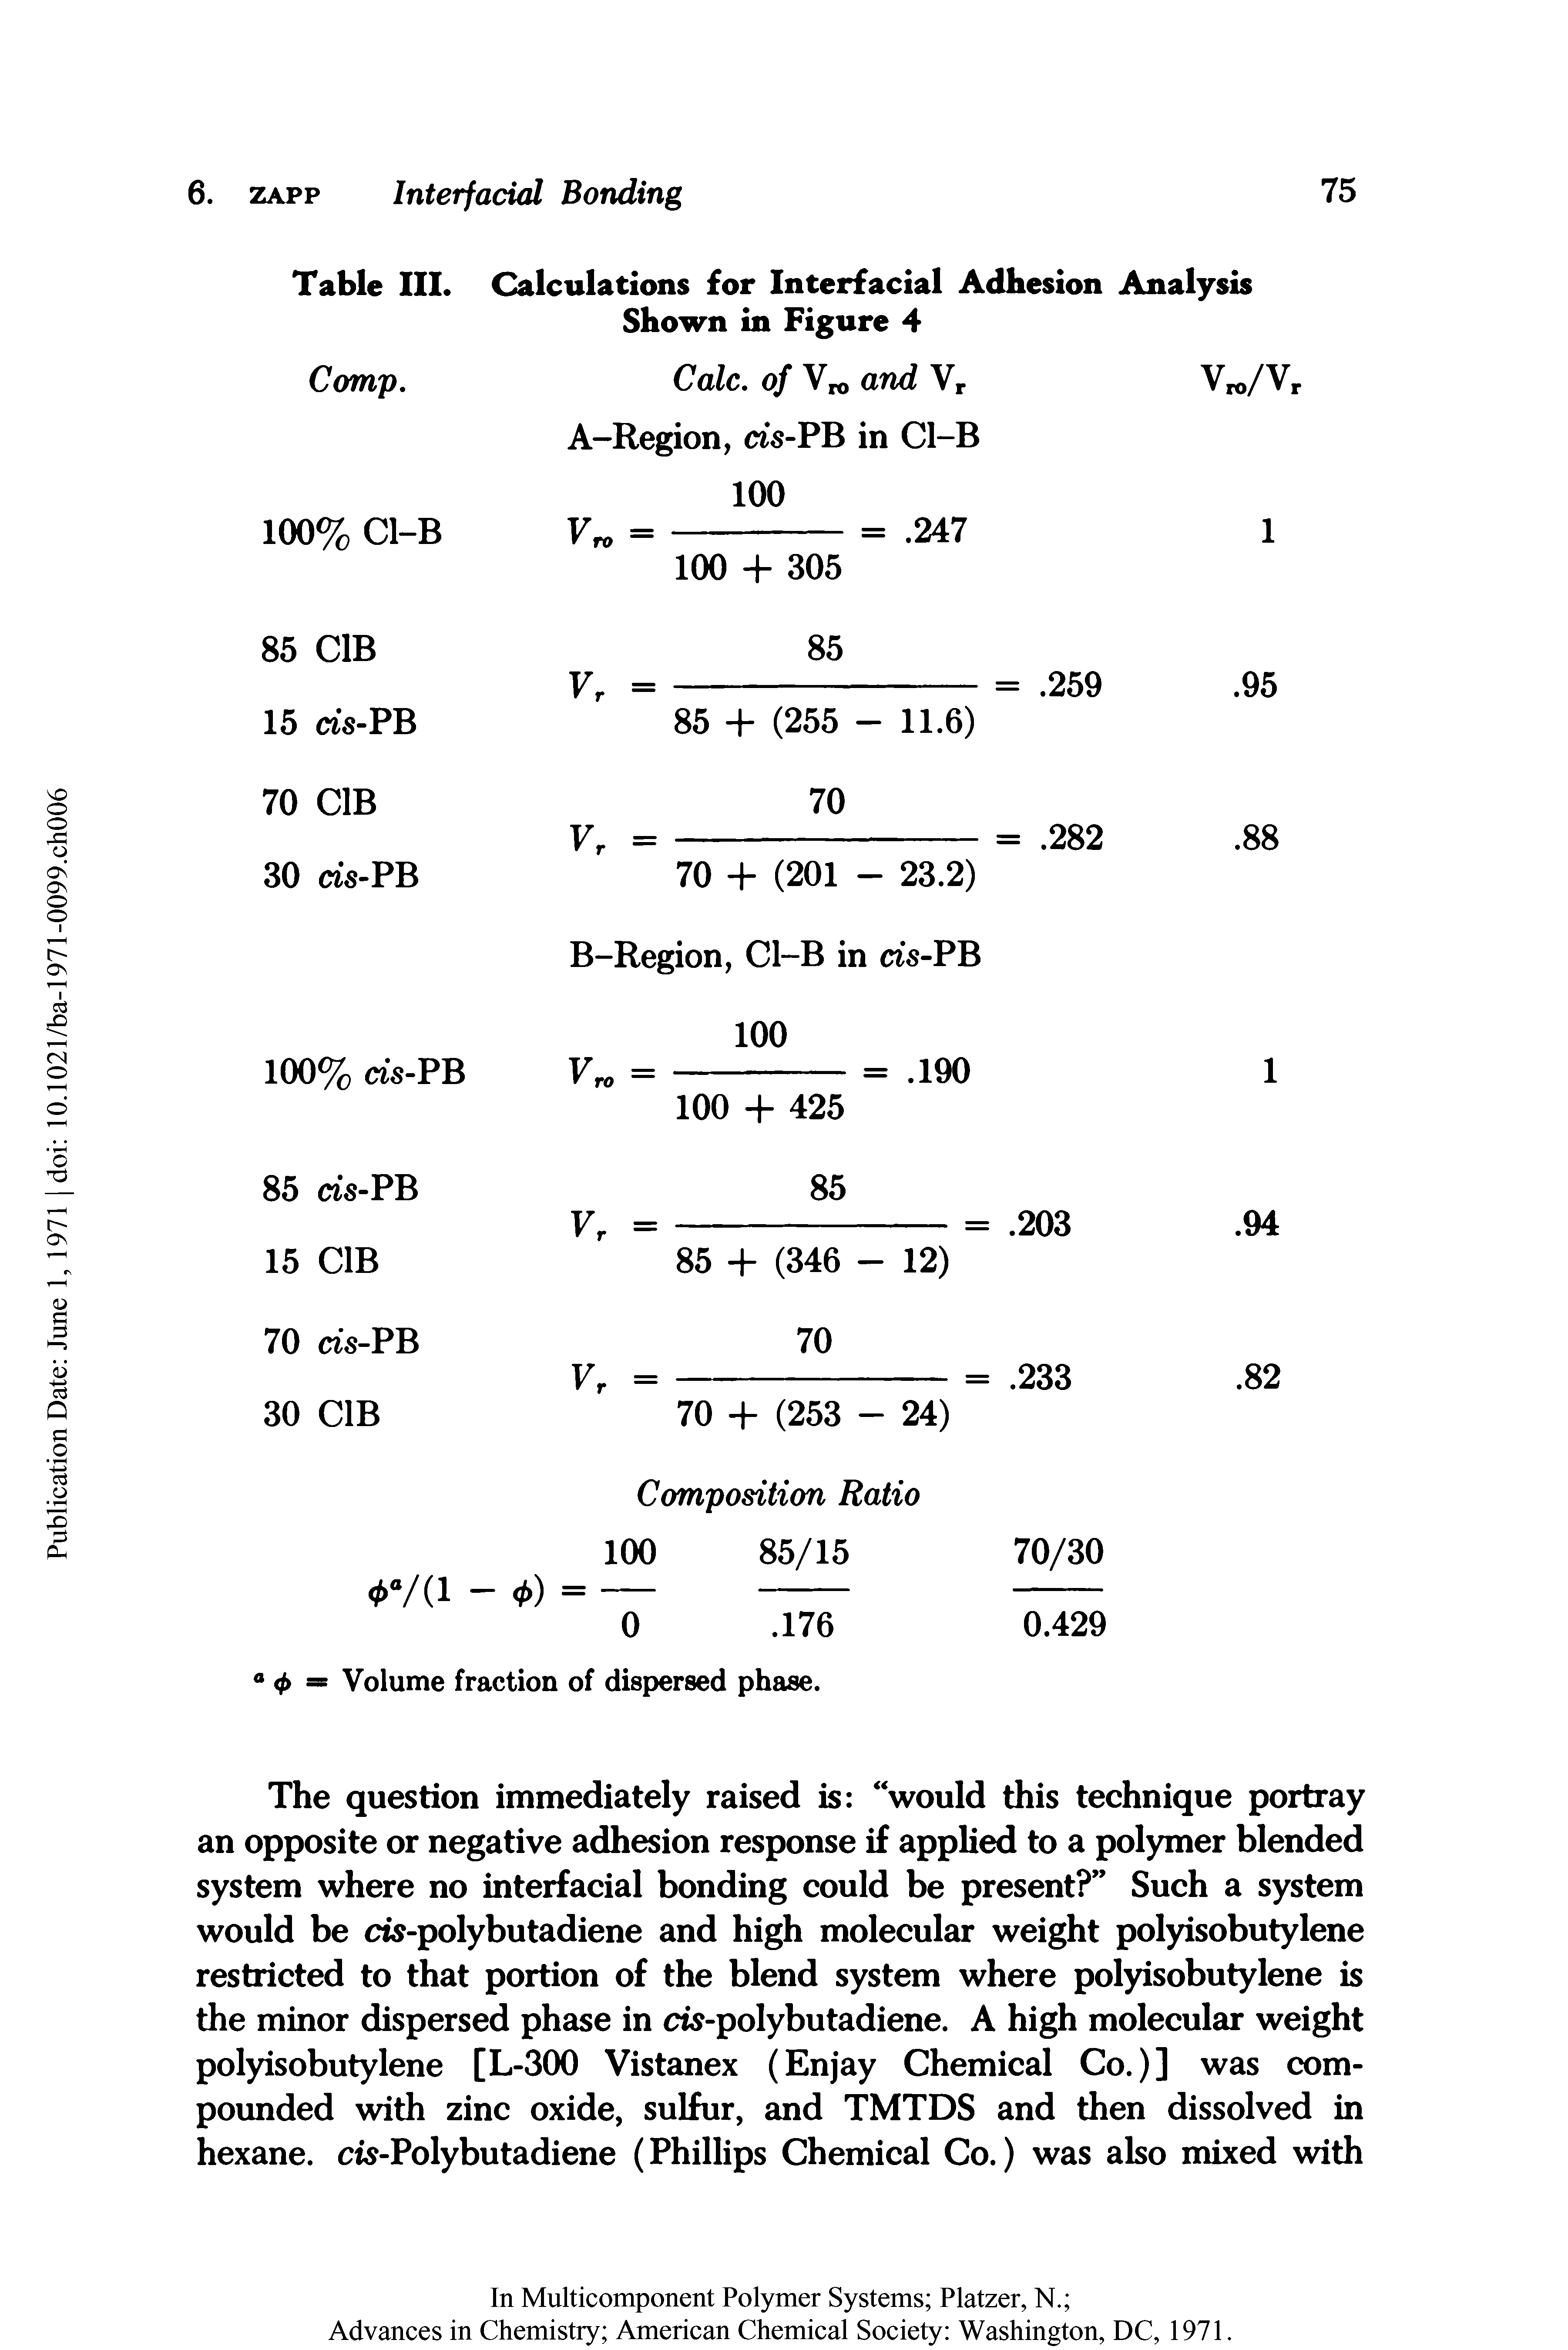 Table III. Calculations for Interfacial Adhesion Analysis Shown in Figure 4...